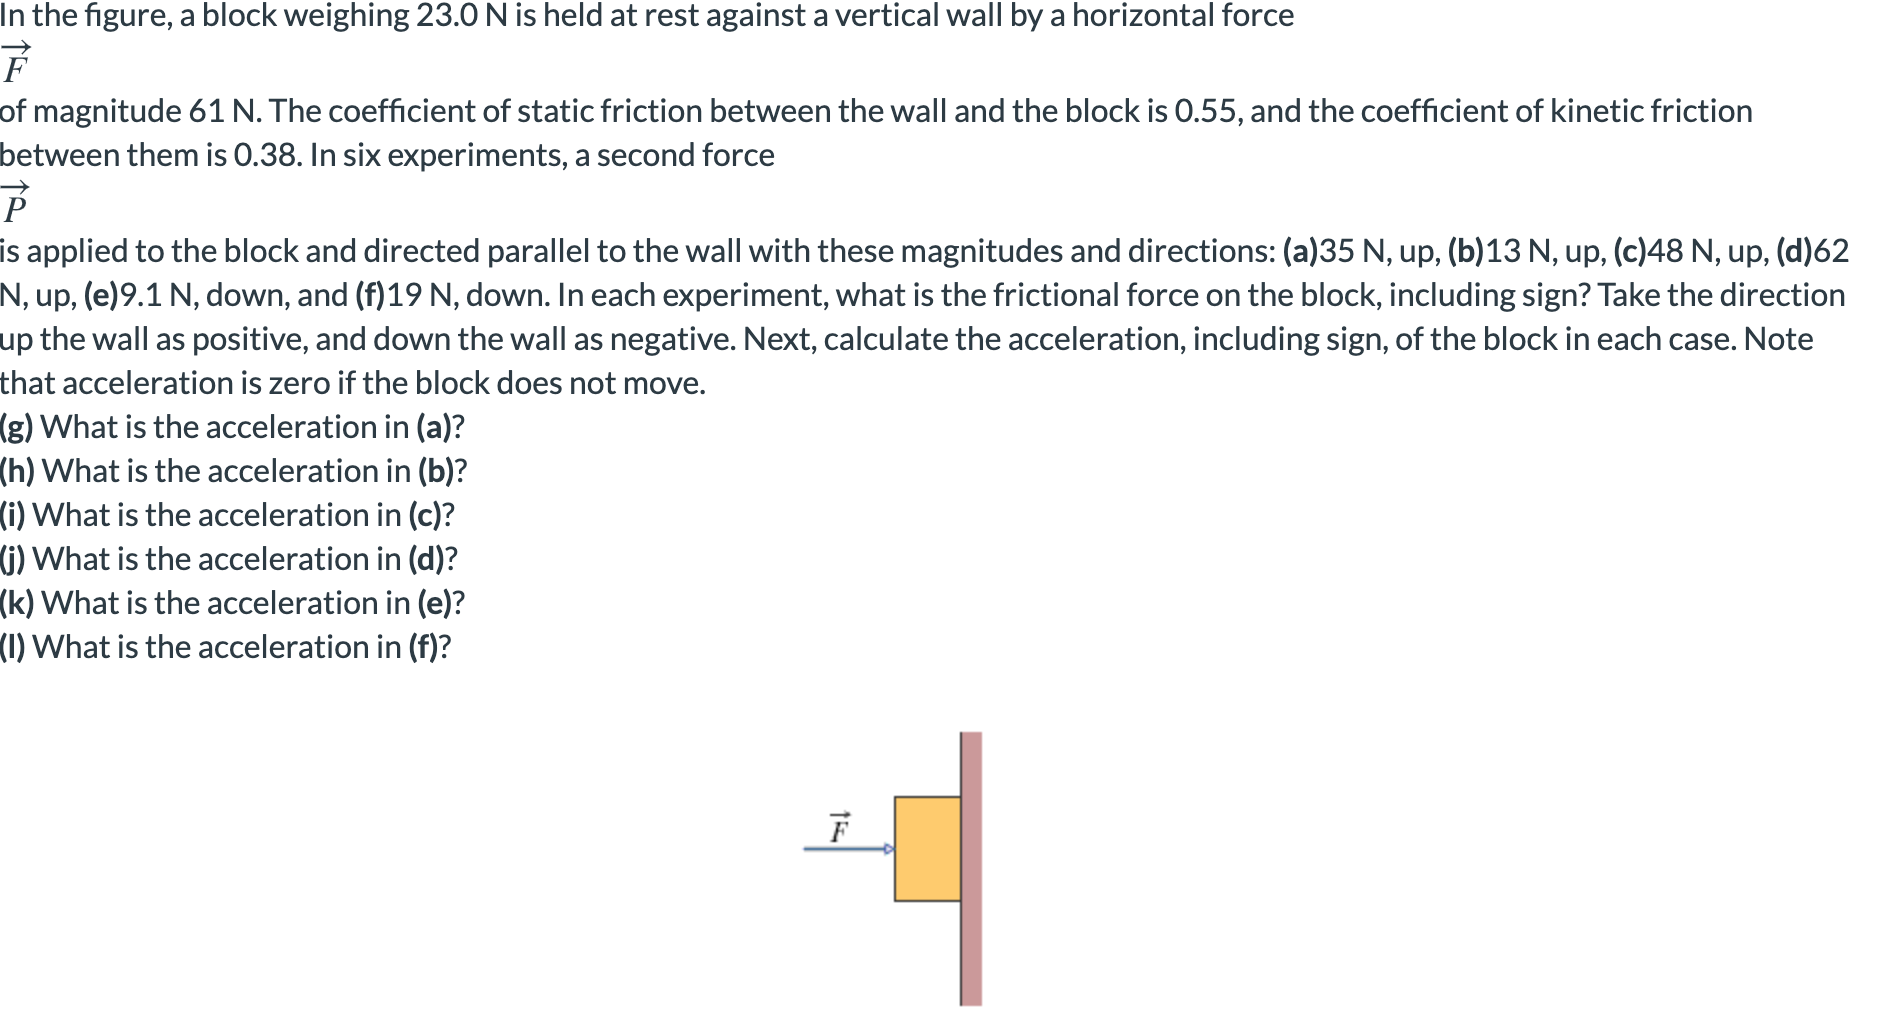 In the figure, a block weighing 23.0 N is held at rest against a vertical wall by a horizontal force
of magnitude 61 N. The coefficient of static friction between the wall and the block is 0.55, and the coefficient of kinetic friction
between them is 0.38. In six experiments, a second force
P
is applied to the block and directed parallel to the wall with these magnitudes and directions: (a)35 N, up, (b) 13 N, up, (c)48 N, up, (d)62
N, up, (e)9.1 N, down, and (f)19 N, down. In each experiment, what is the frictional force on the block, including sign? Take the direction
up the wall as positive, and down the wall as negative. Next, calculate the acceleration, including sign, of the block in each case. Note
that acceleration is zero if the block does not move.
(g) What is the acceleration in (a)?
(h) What is the acceleration in (b)?
(i) What is the acceleration in (c)?
(i) What is the acceleration in (d)?
(k) What is the acceleration in (e)?
(1) What is the acceleration in (f)?
